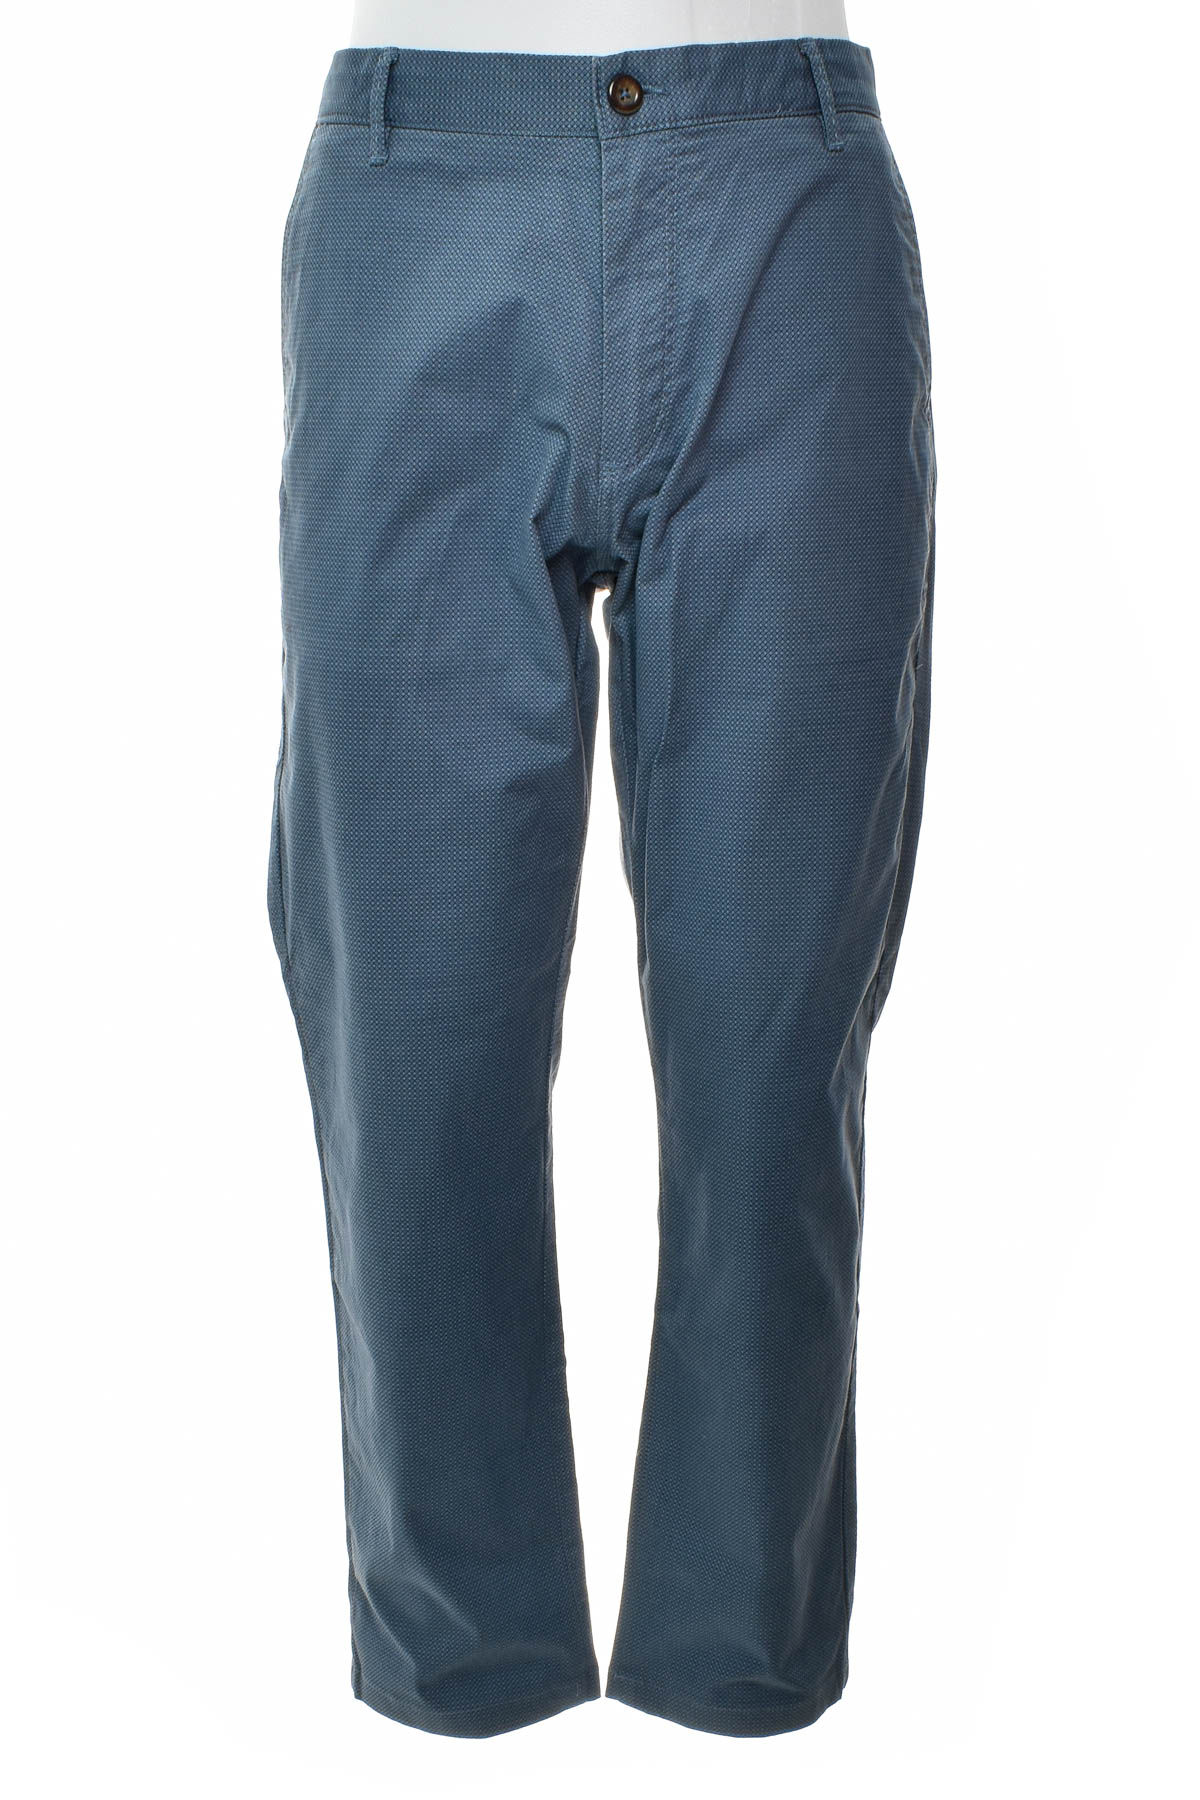 Men's trousers - RESERVED - 0